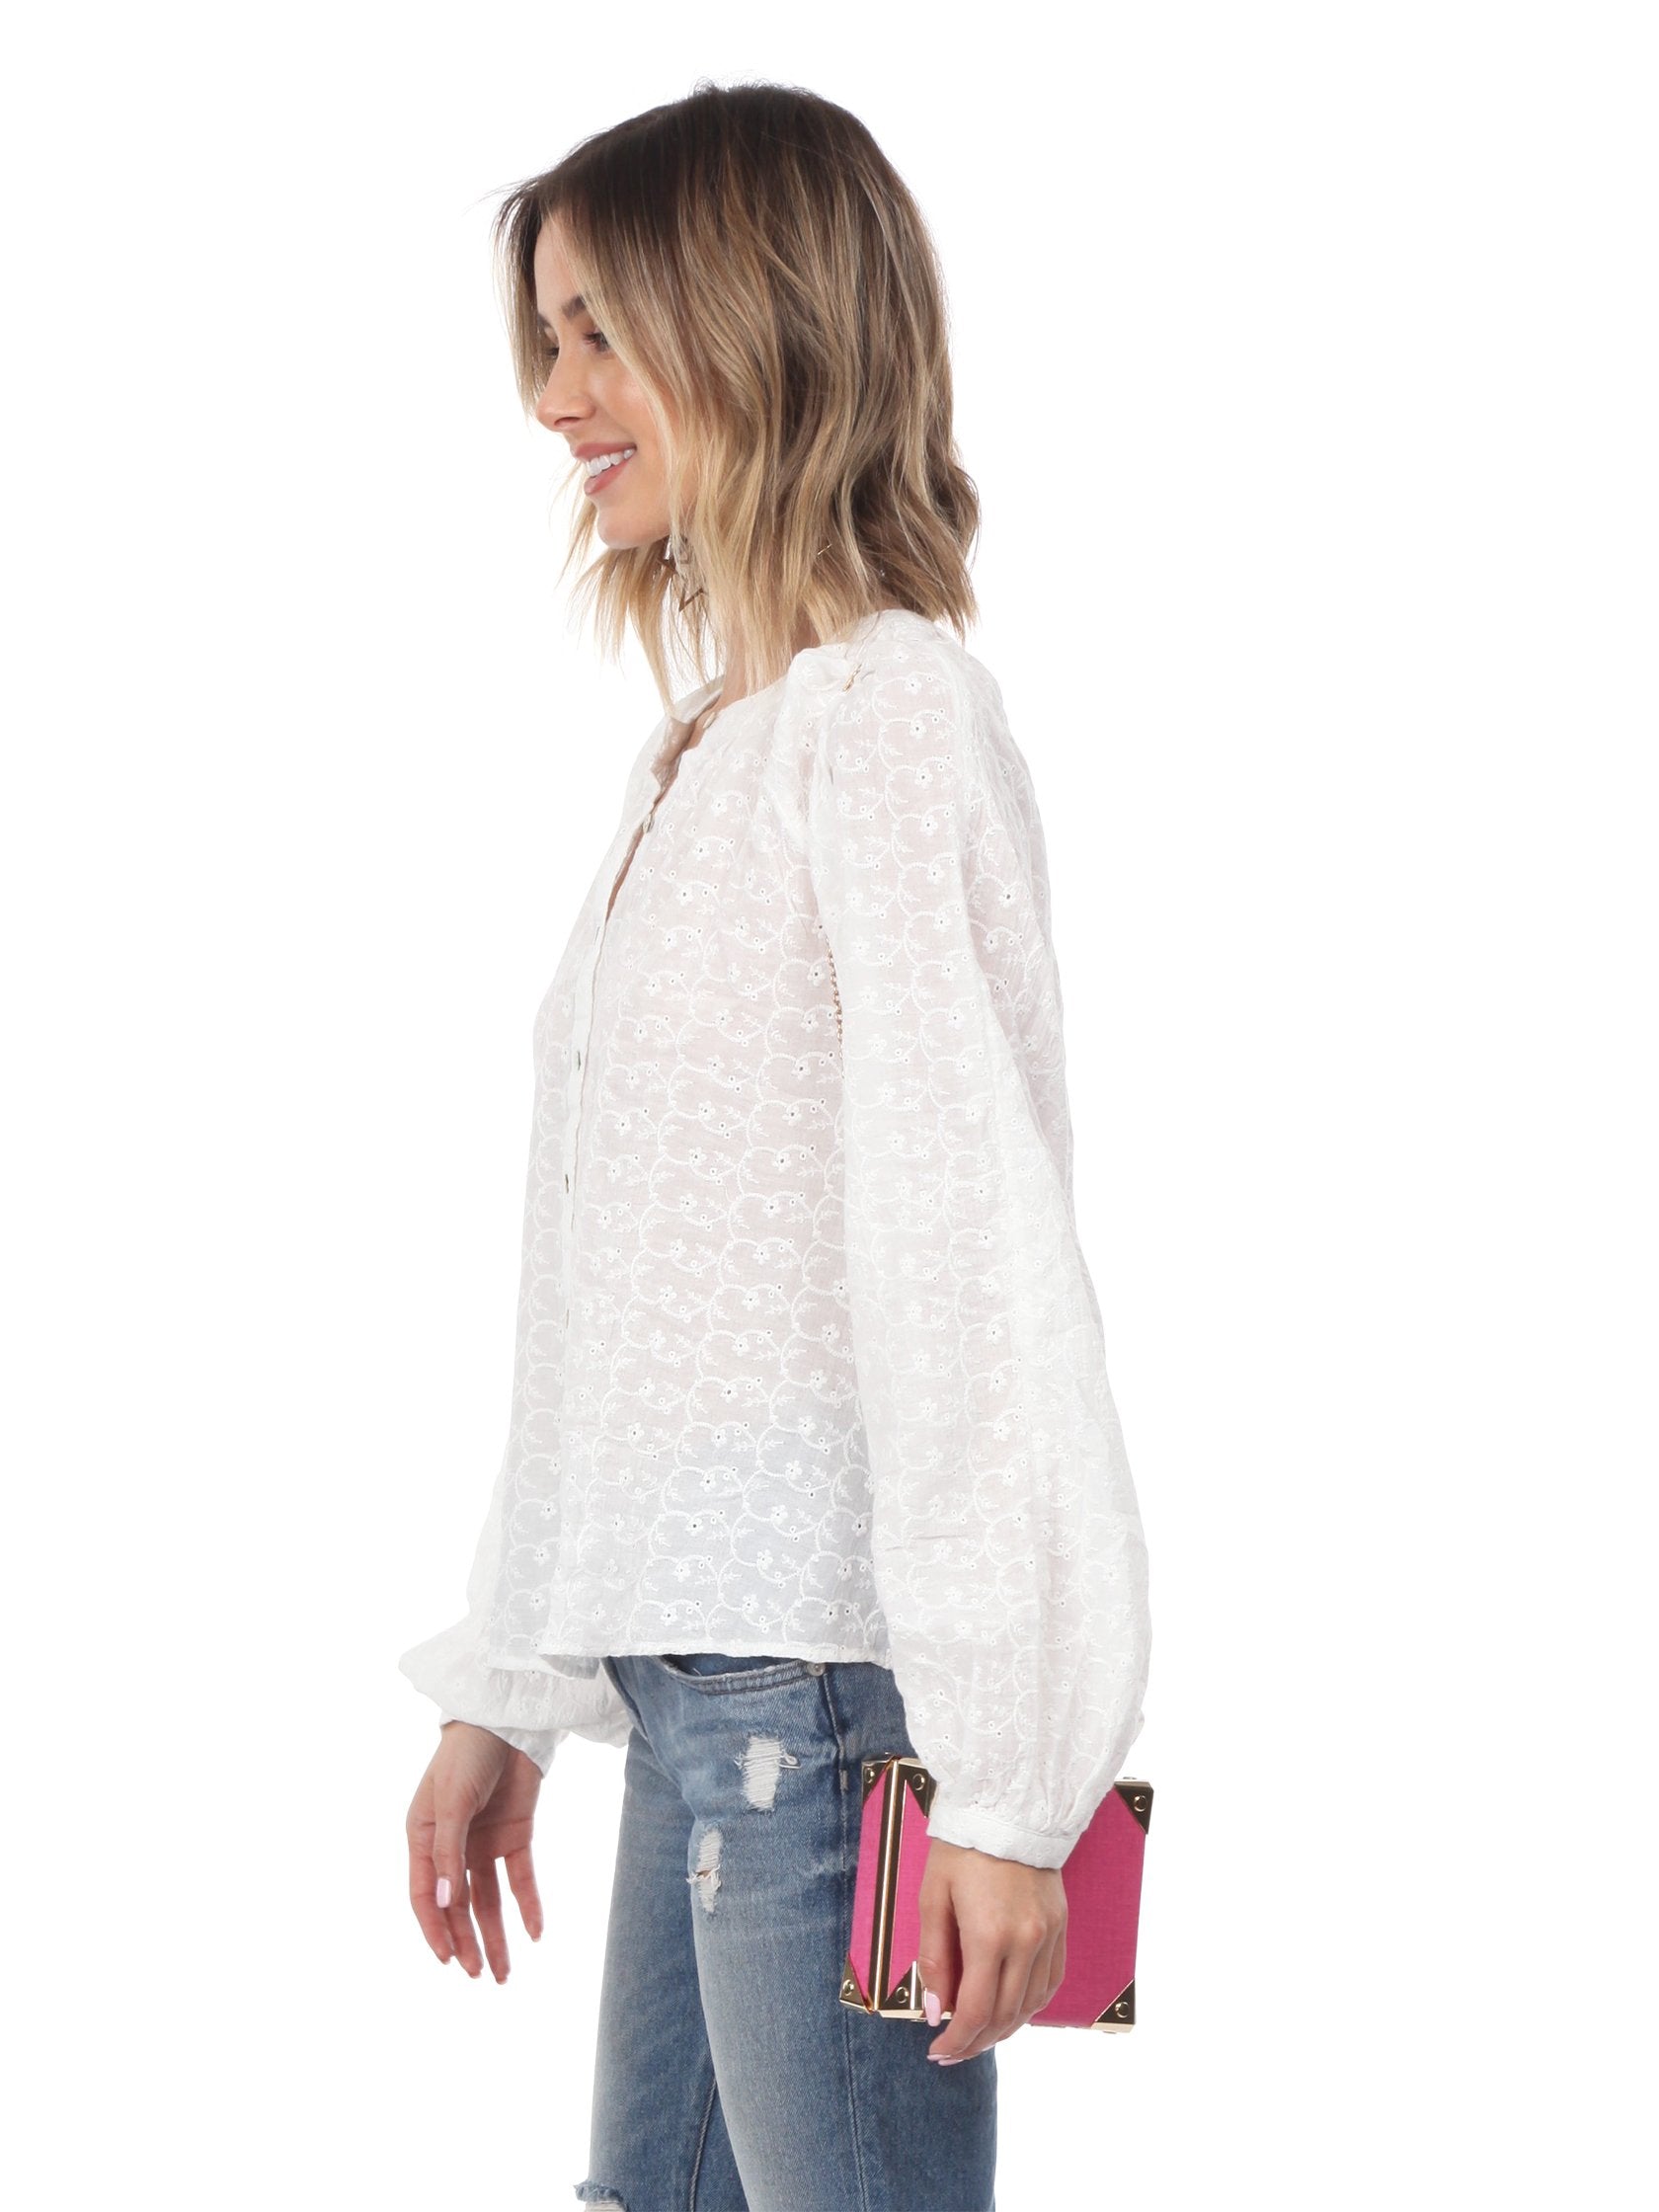 Women wearing a top rental from Free People called Down From The Clouds Peasant Top